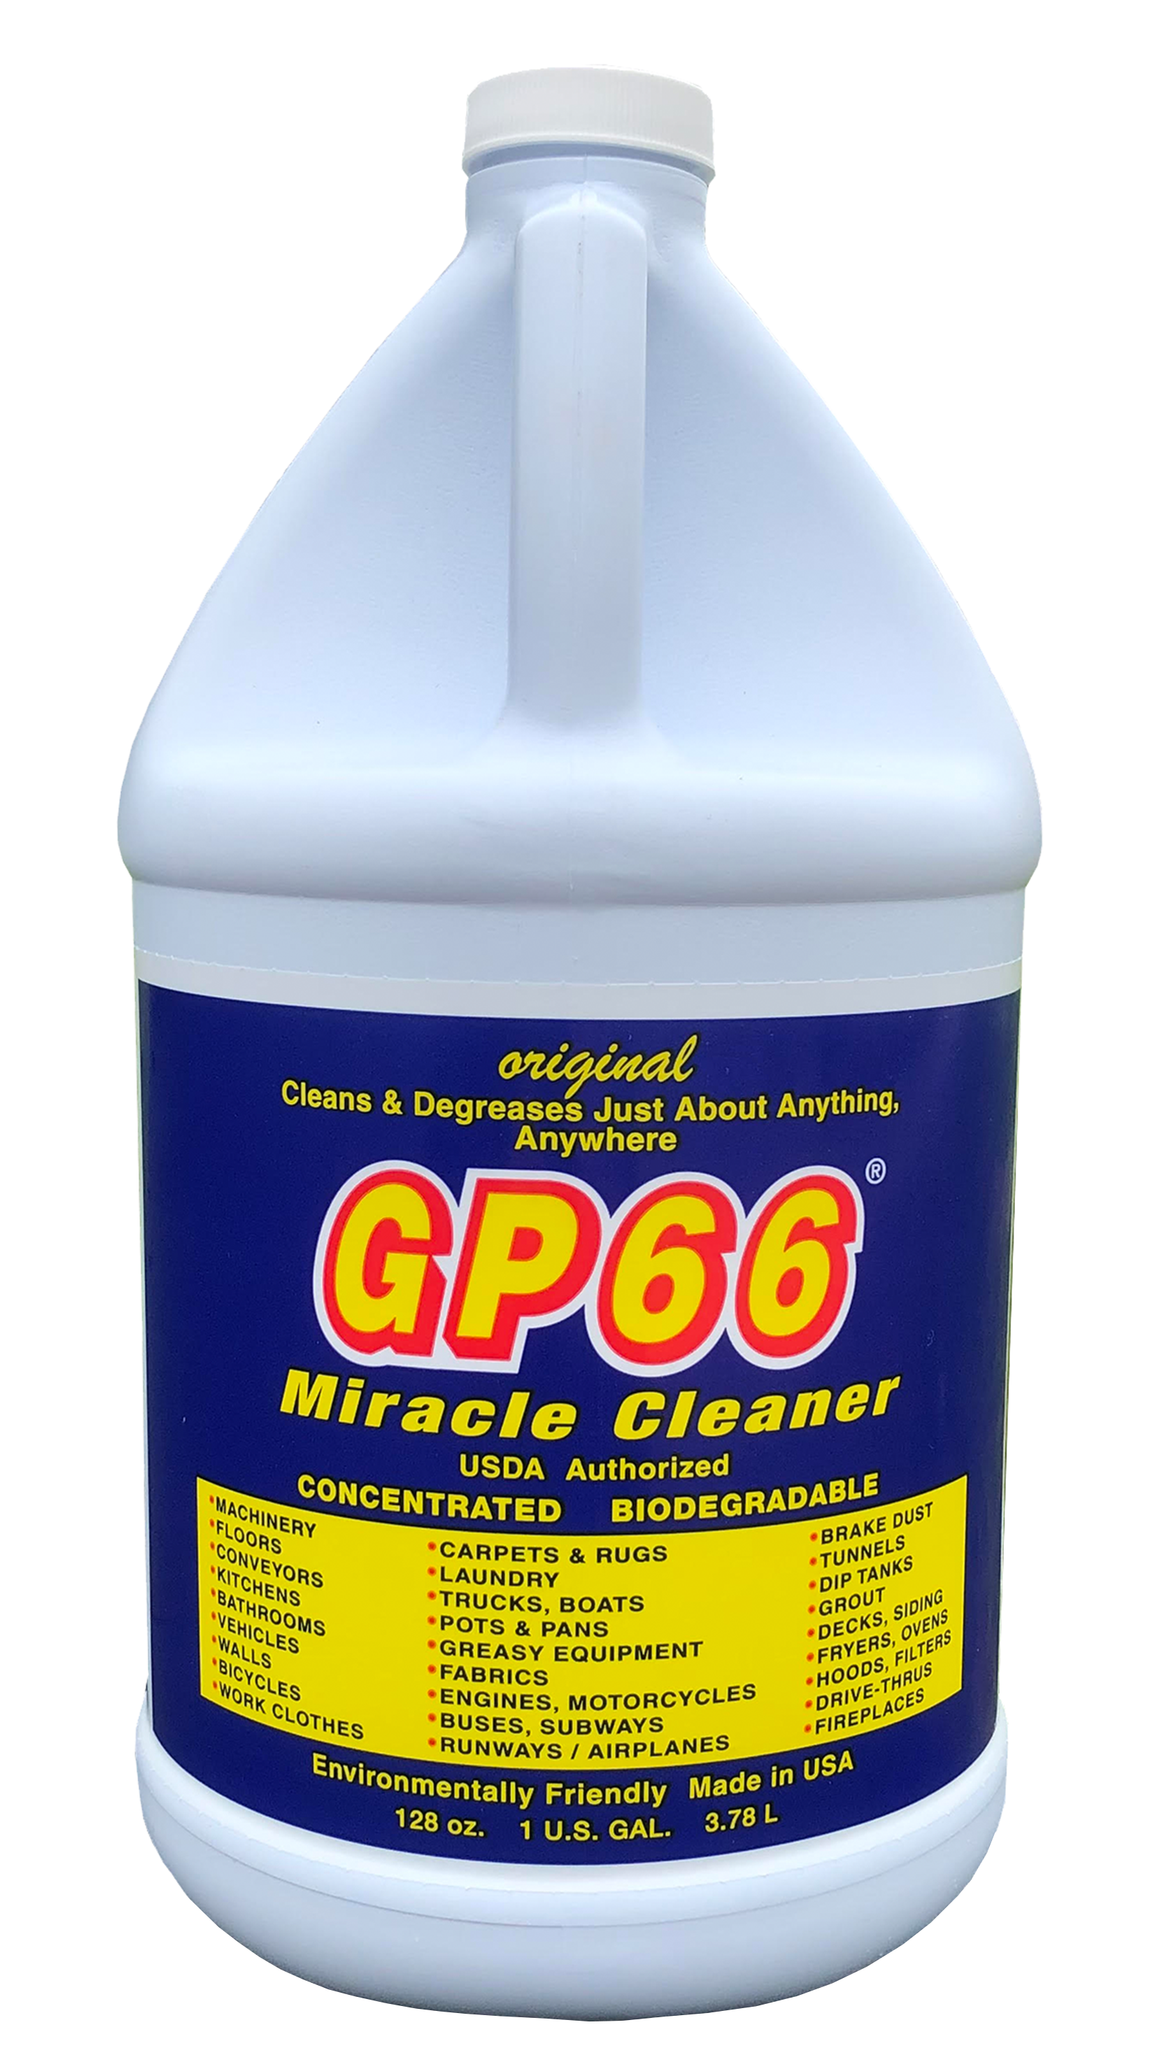 https://www.momjunction.com/wp-content/uploads/product-images/gp66-miracle-cleaner_afl2312.png